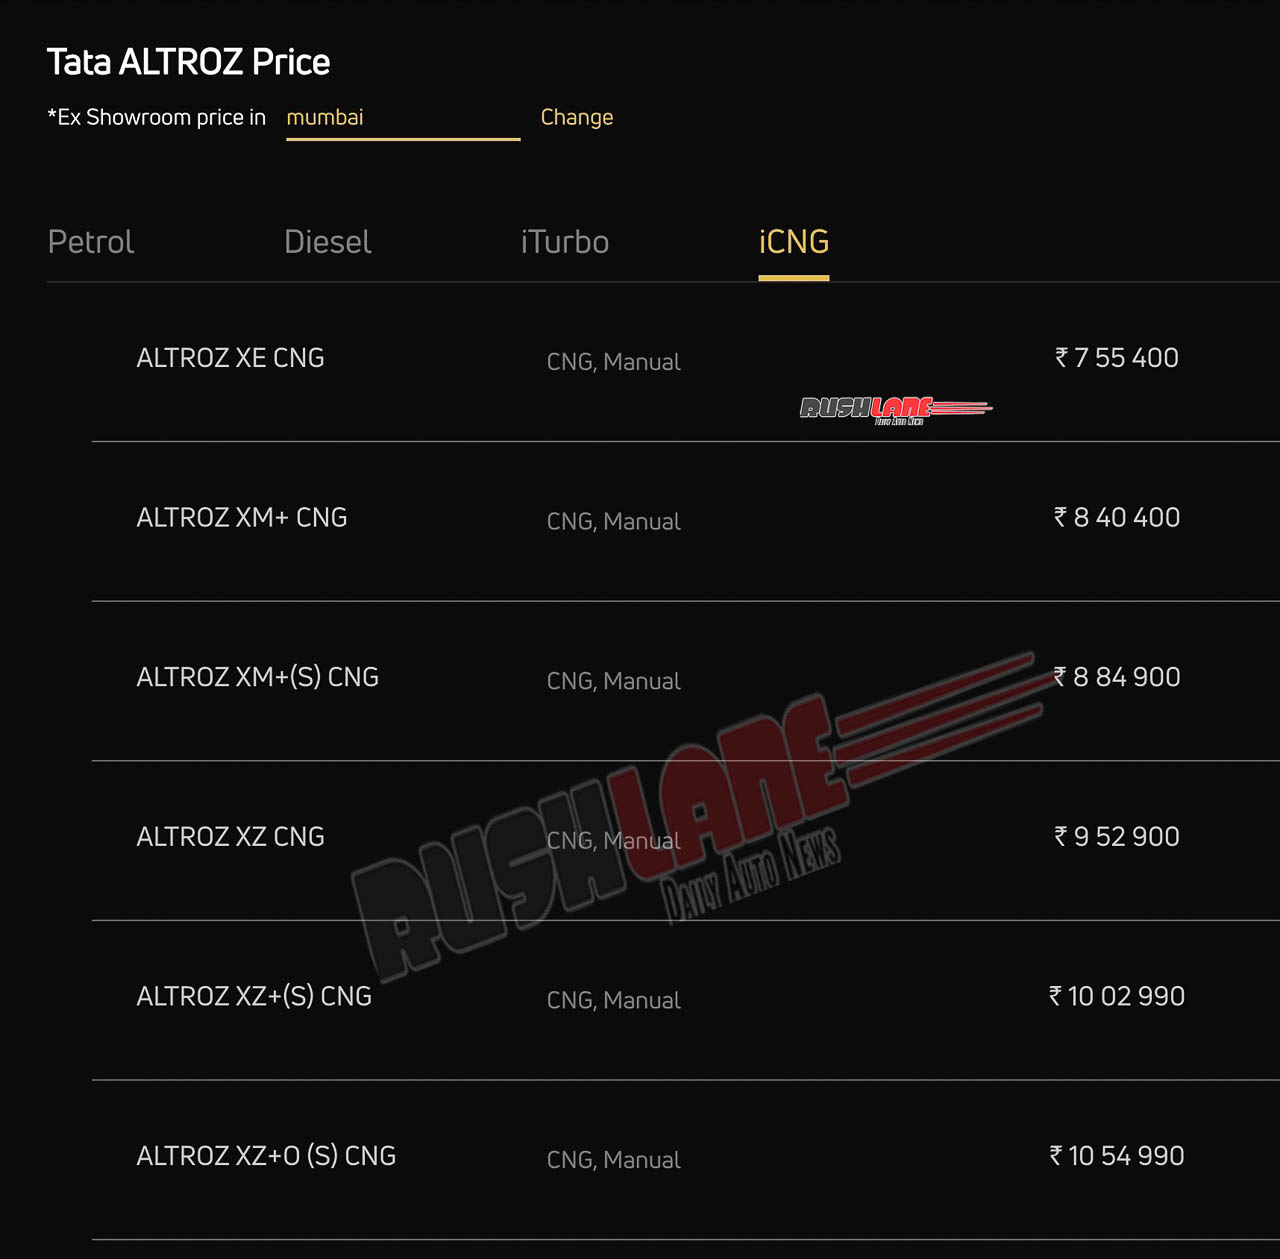 Tata Altroz CNG prices